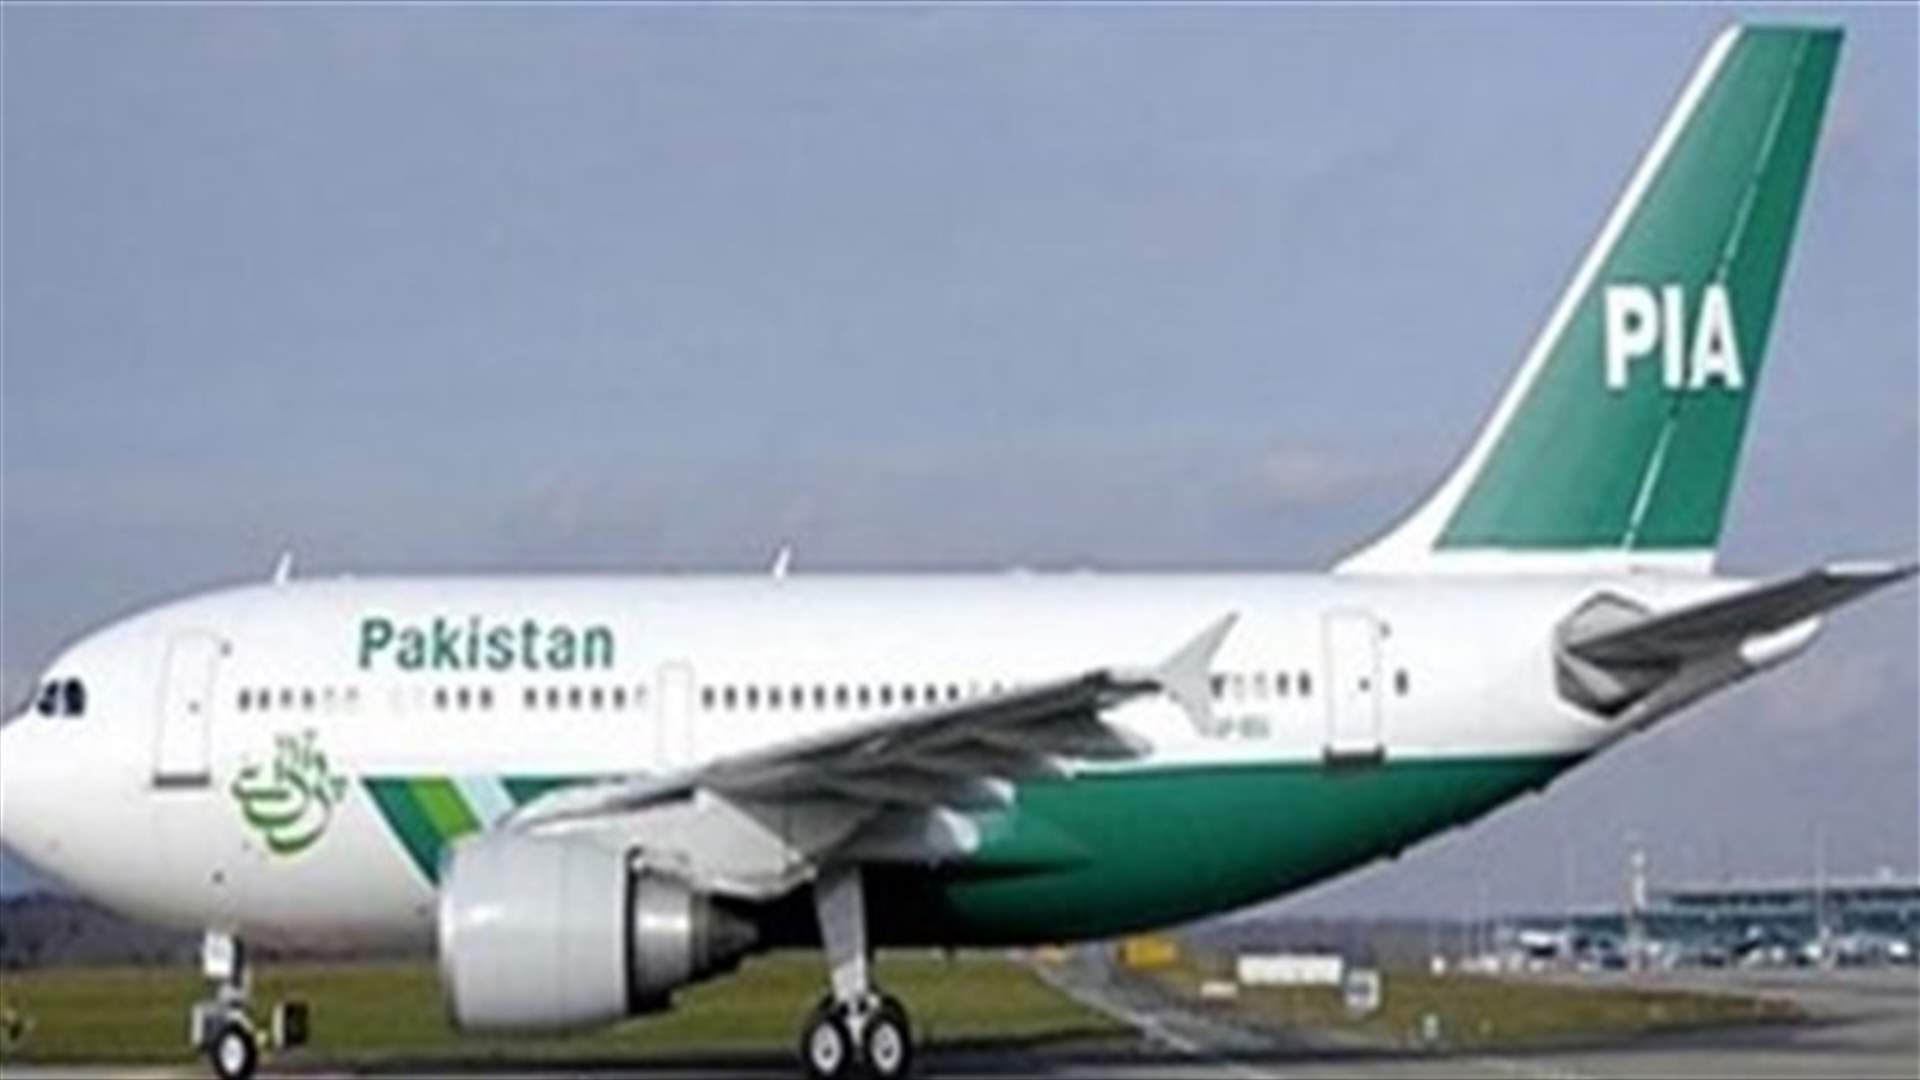 No survivors likely in crash of Pakistani plane carrying about 40 people